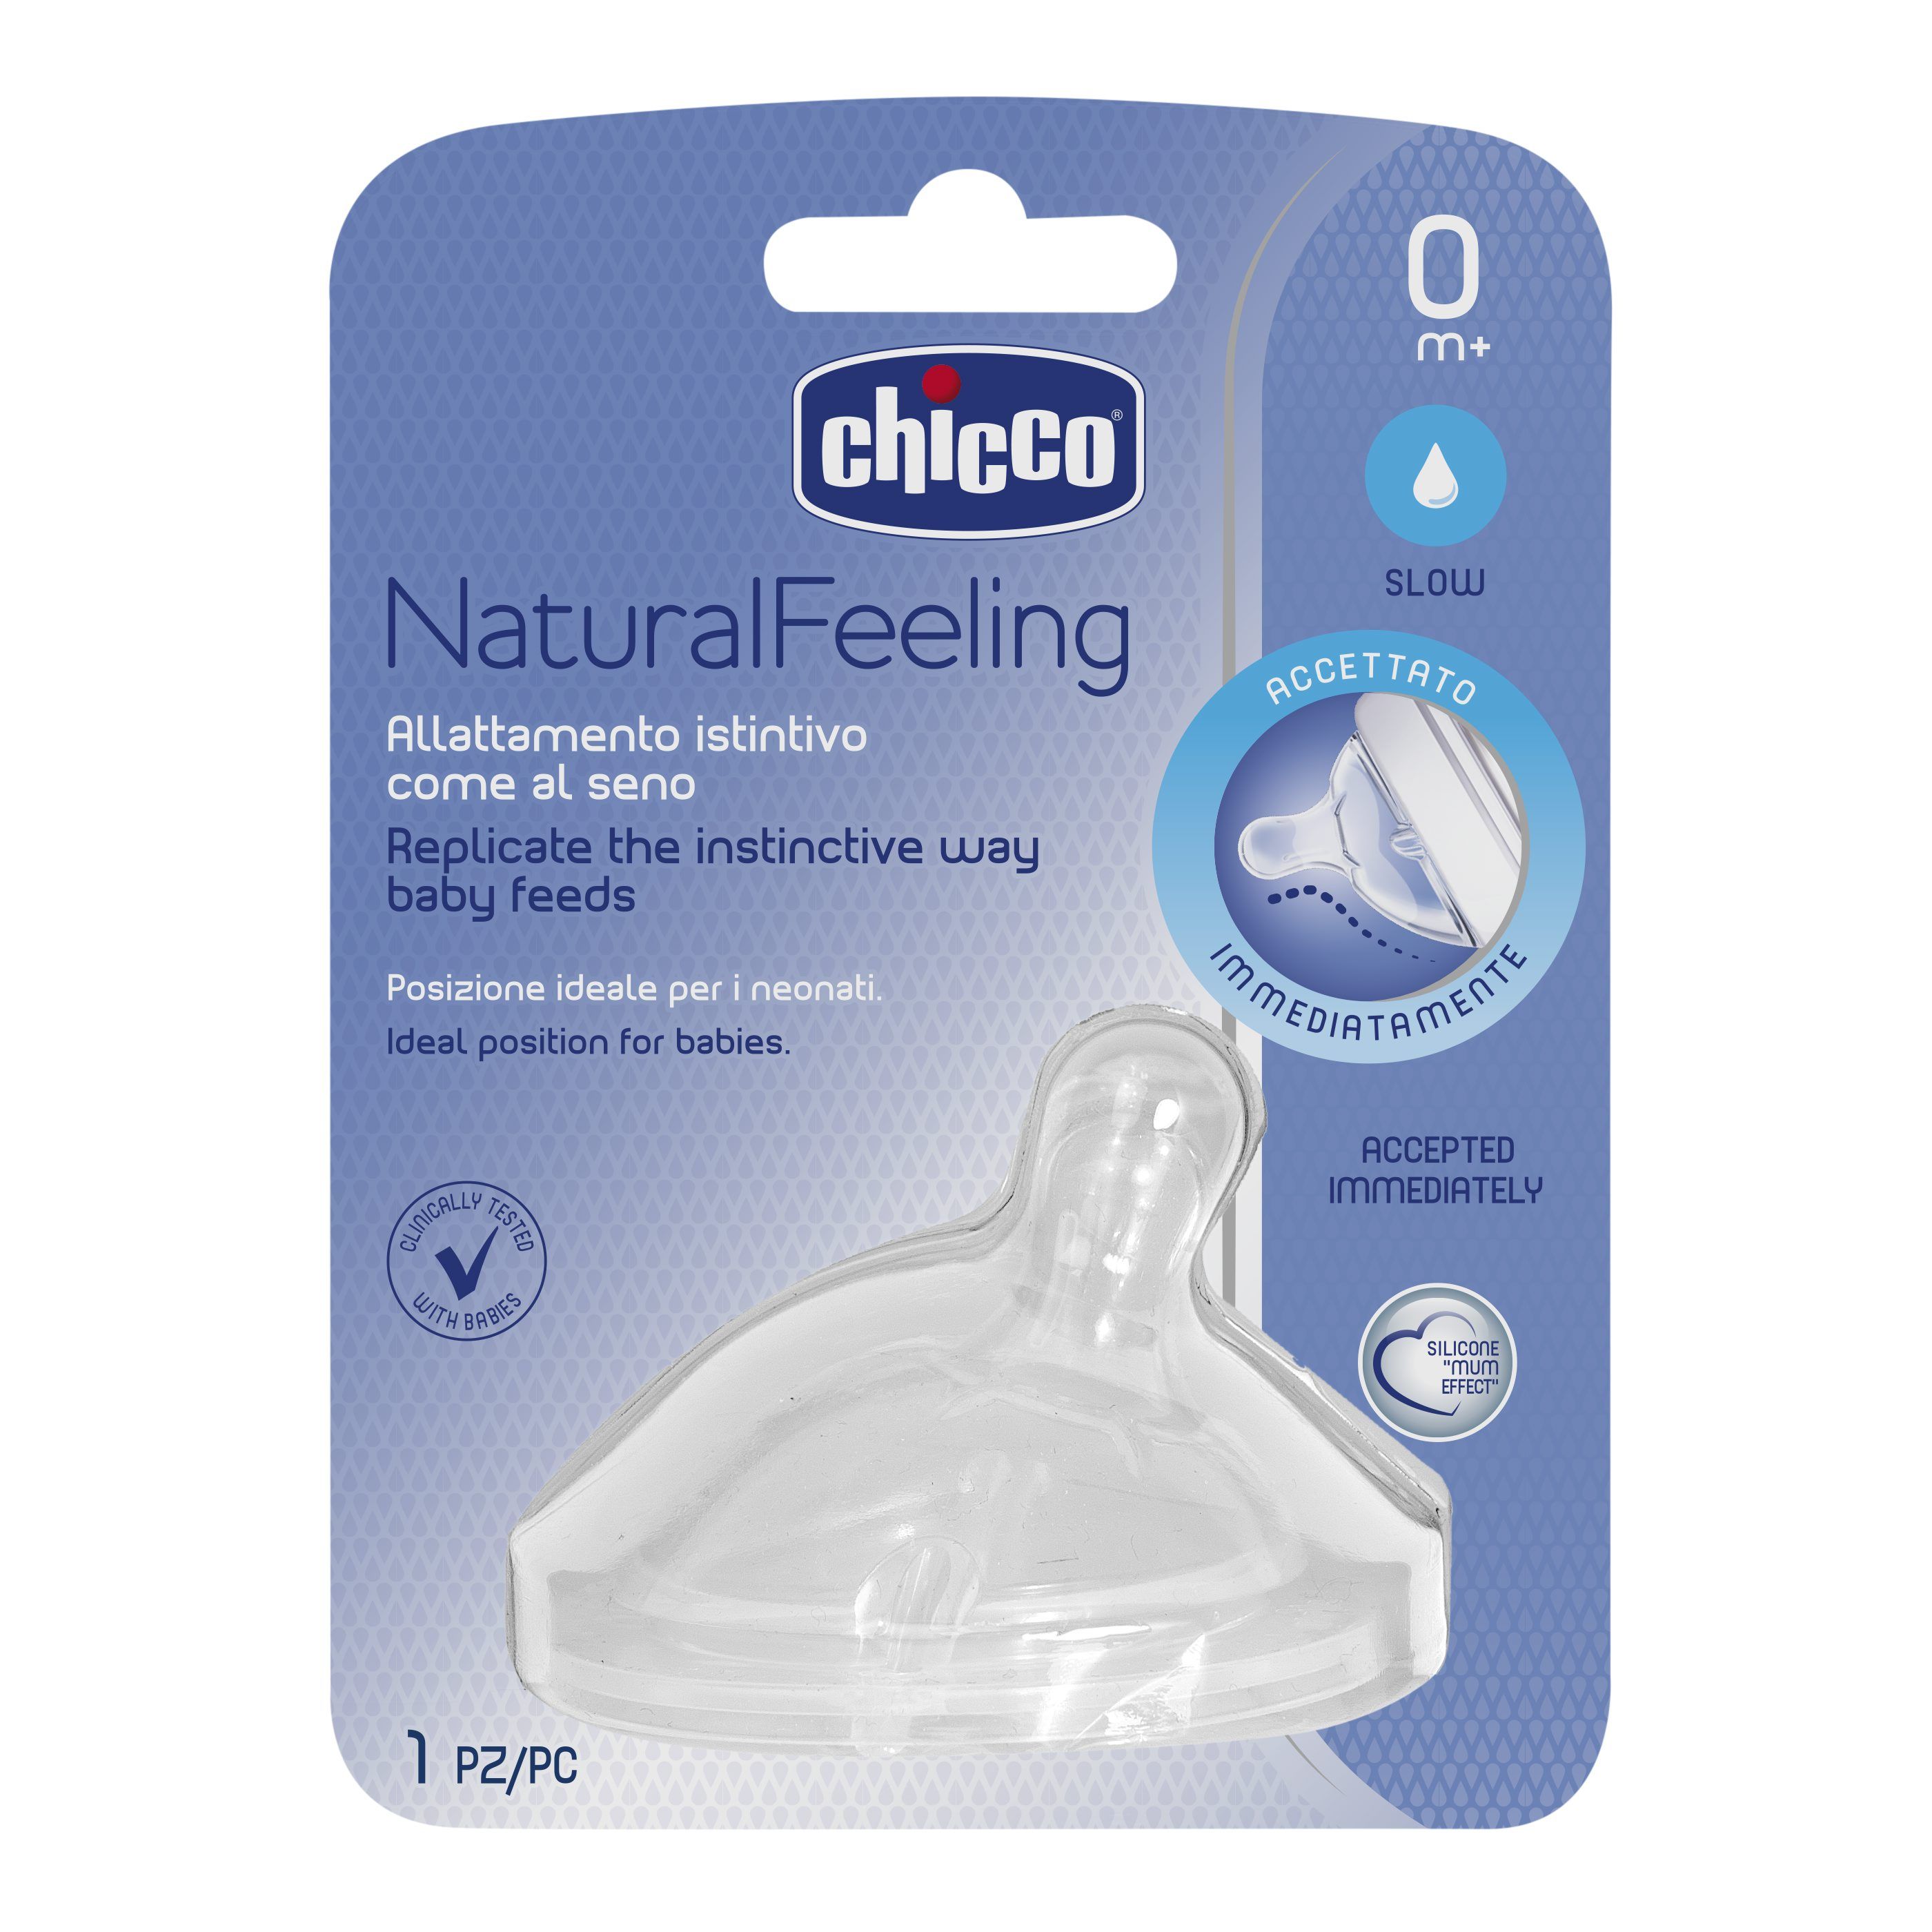 Feeling 00. Соска 2 шт Chicco natural feeling (силикон). Chicco соска natural feeling 2шт.,6мес.+,сил. С флексорами,быстр.поток. Соска Chicco natural feeling силиконовая 2м+ 1шт.. Соска Chicco natural feeling, 0 мес+.